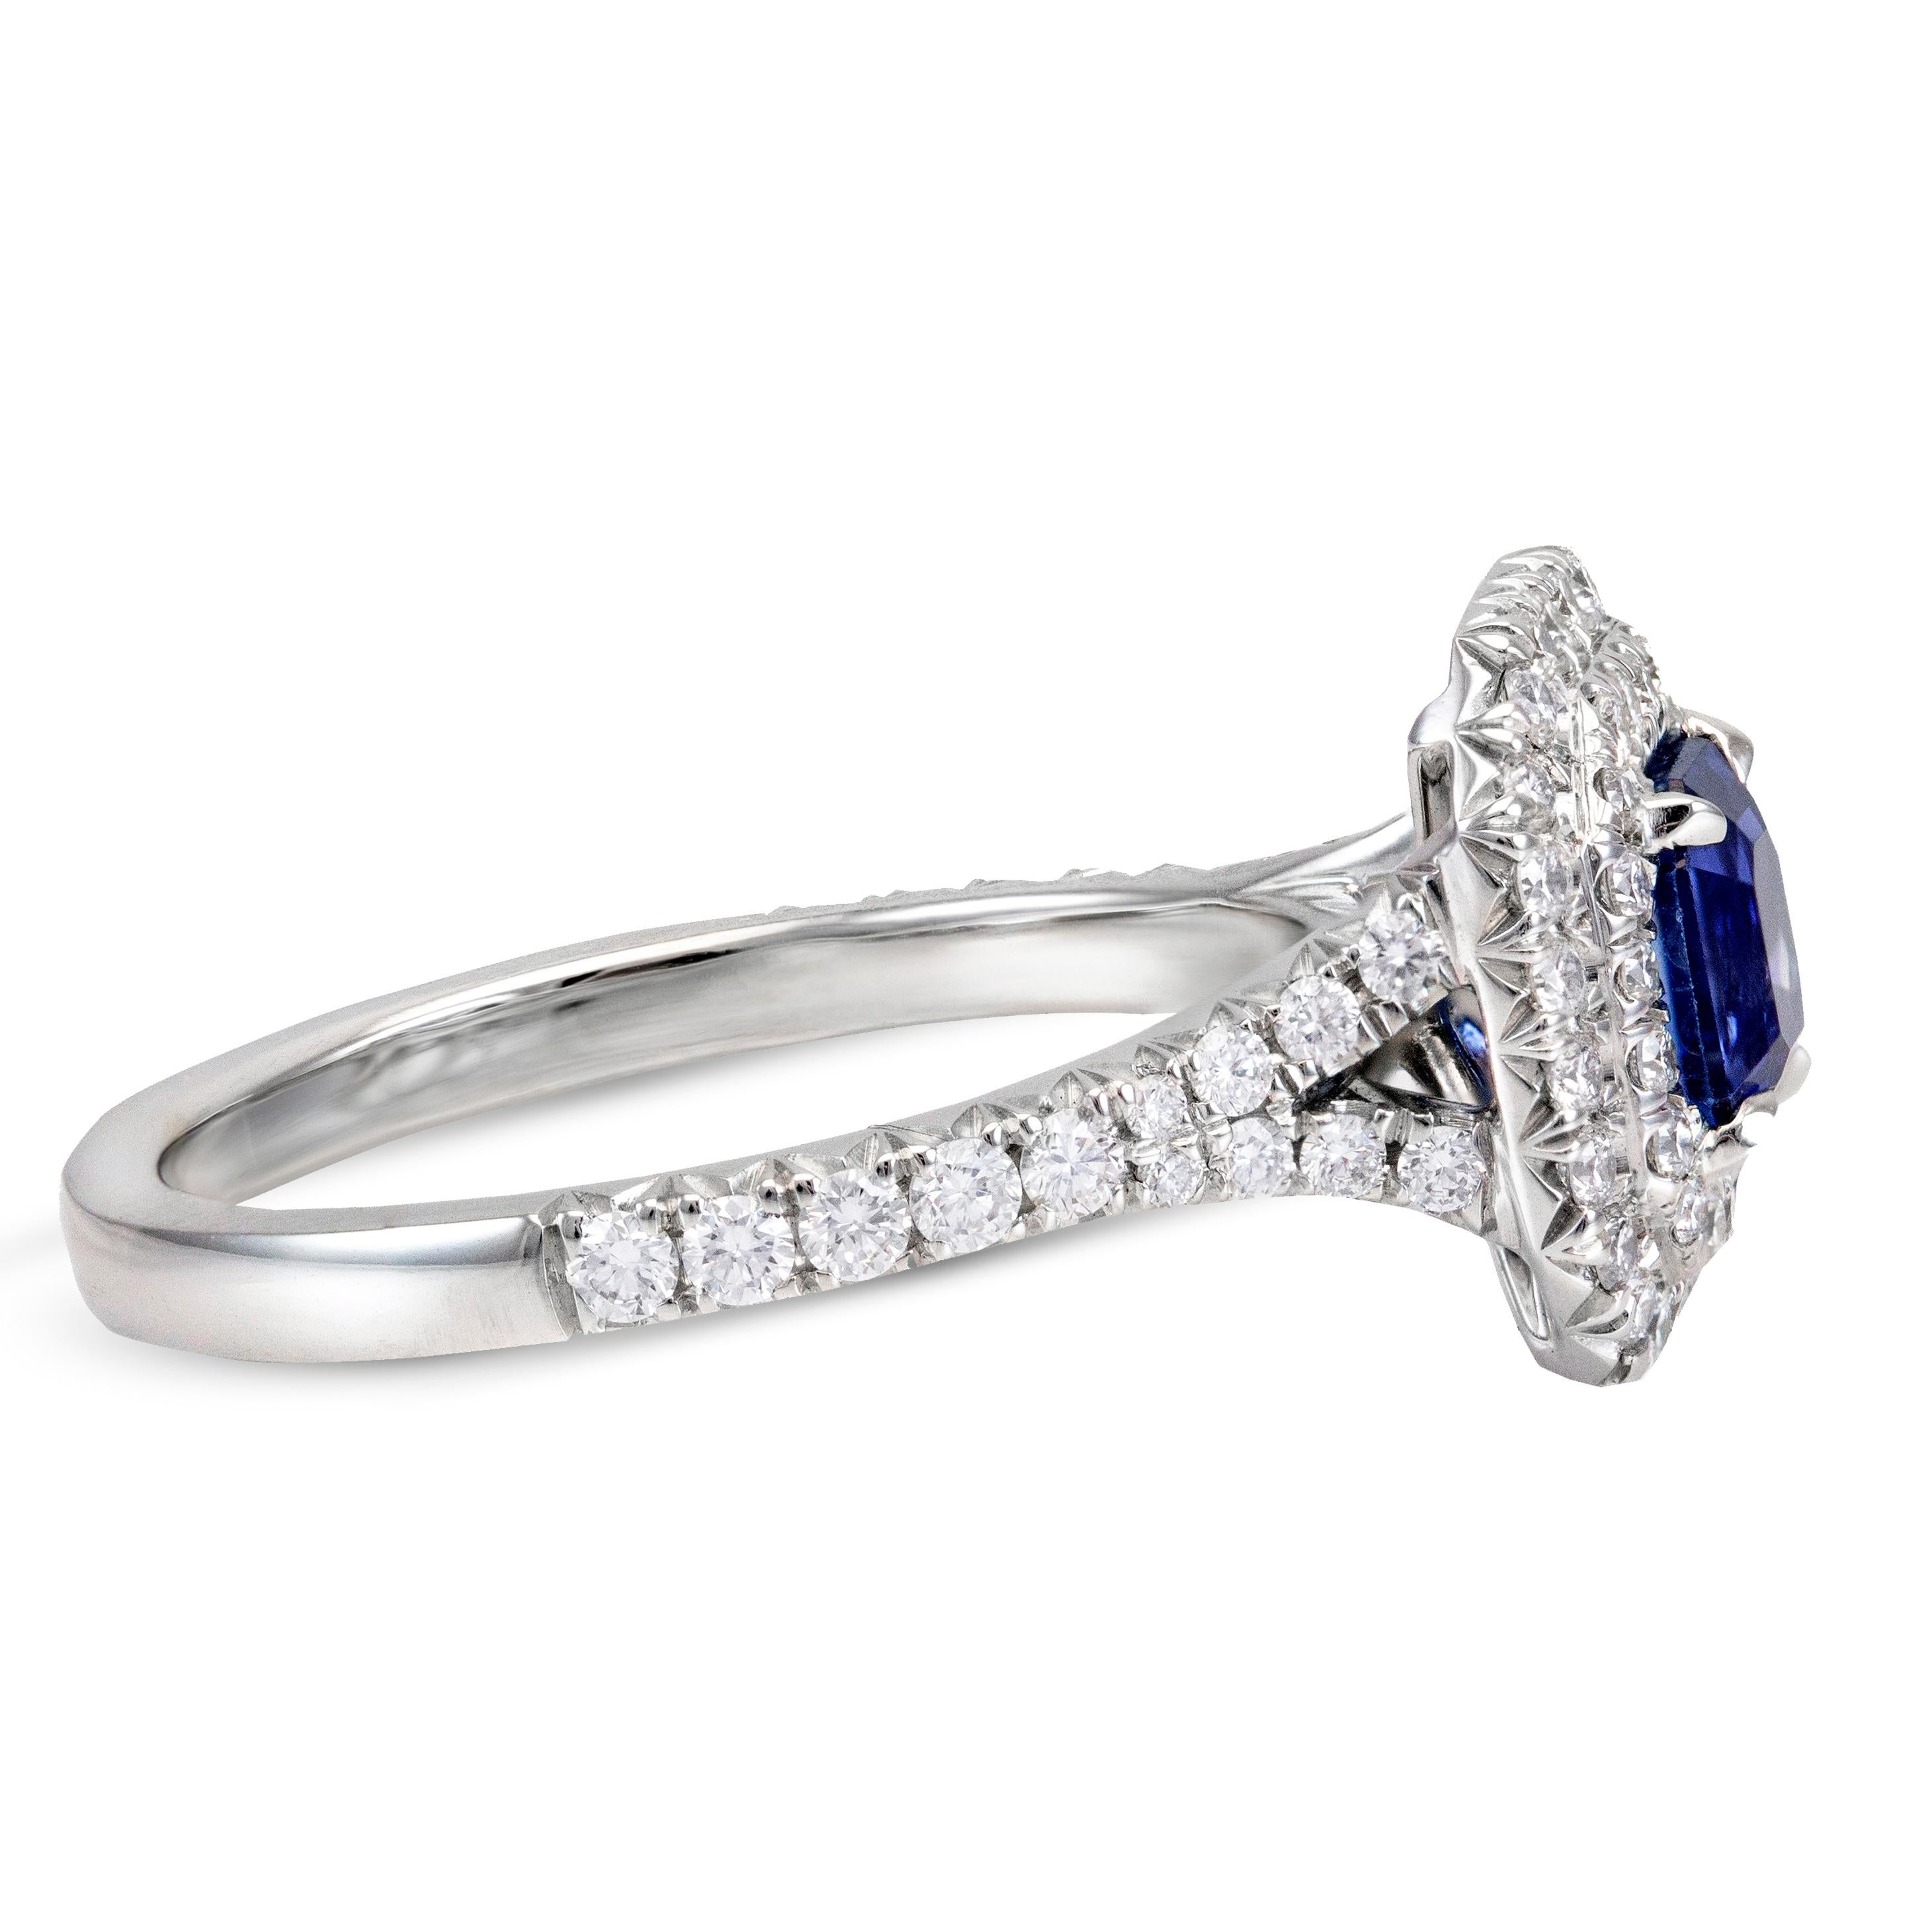 Features a beautiful 1.18 carat blue sapphire at the center. Framed by 2 rows of brilliant round diamonds. Diamonds also set half way all over the shank of ring. Weight of the diamonds is 0.70 carats. Made in 18k white gold. Size 6 US